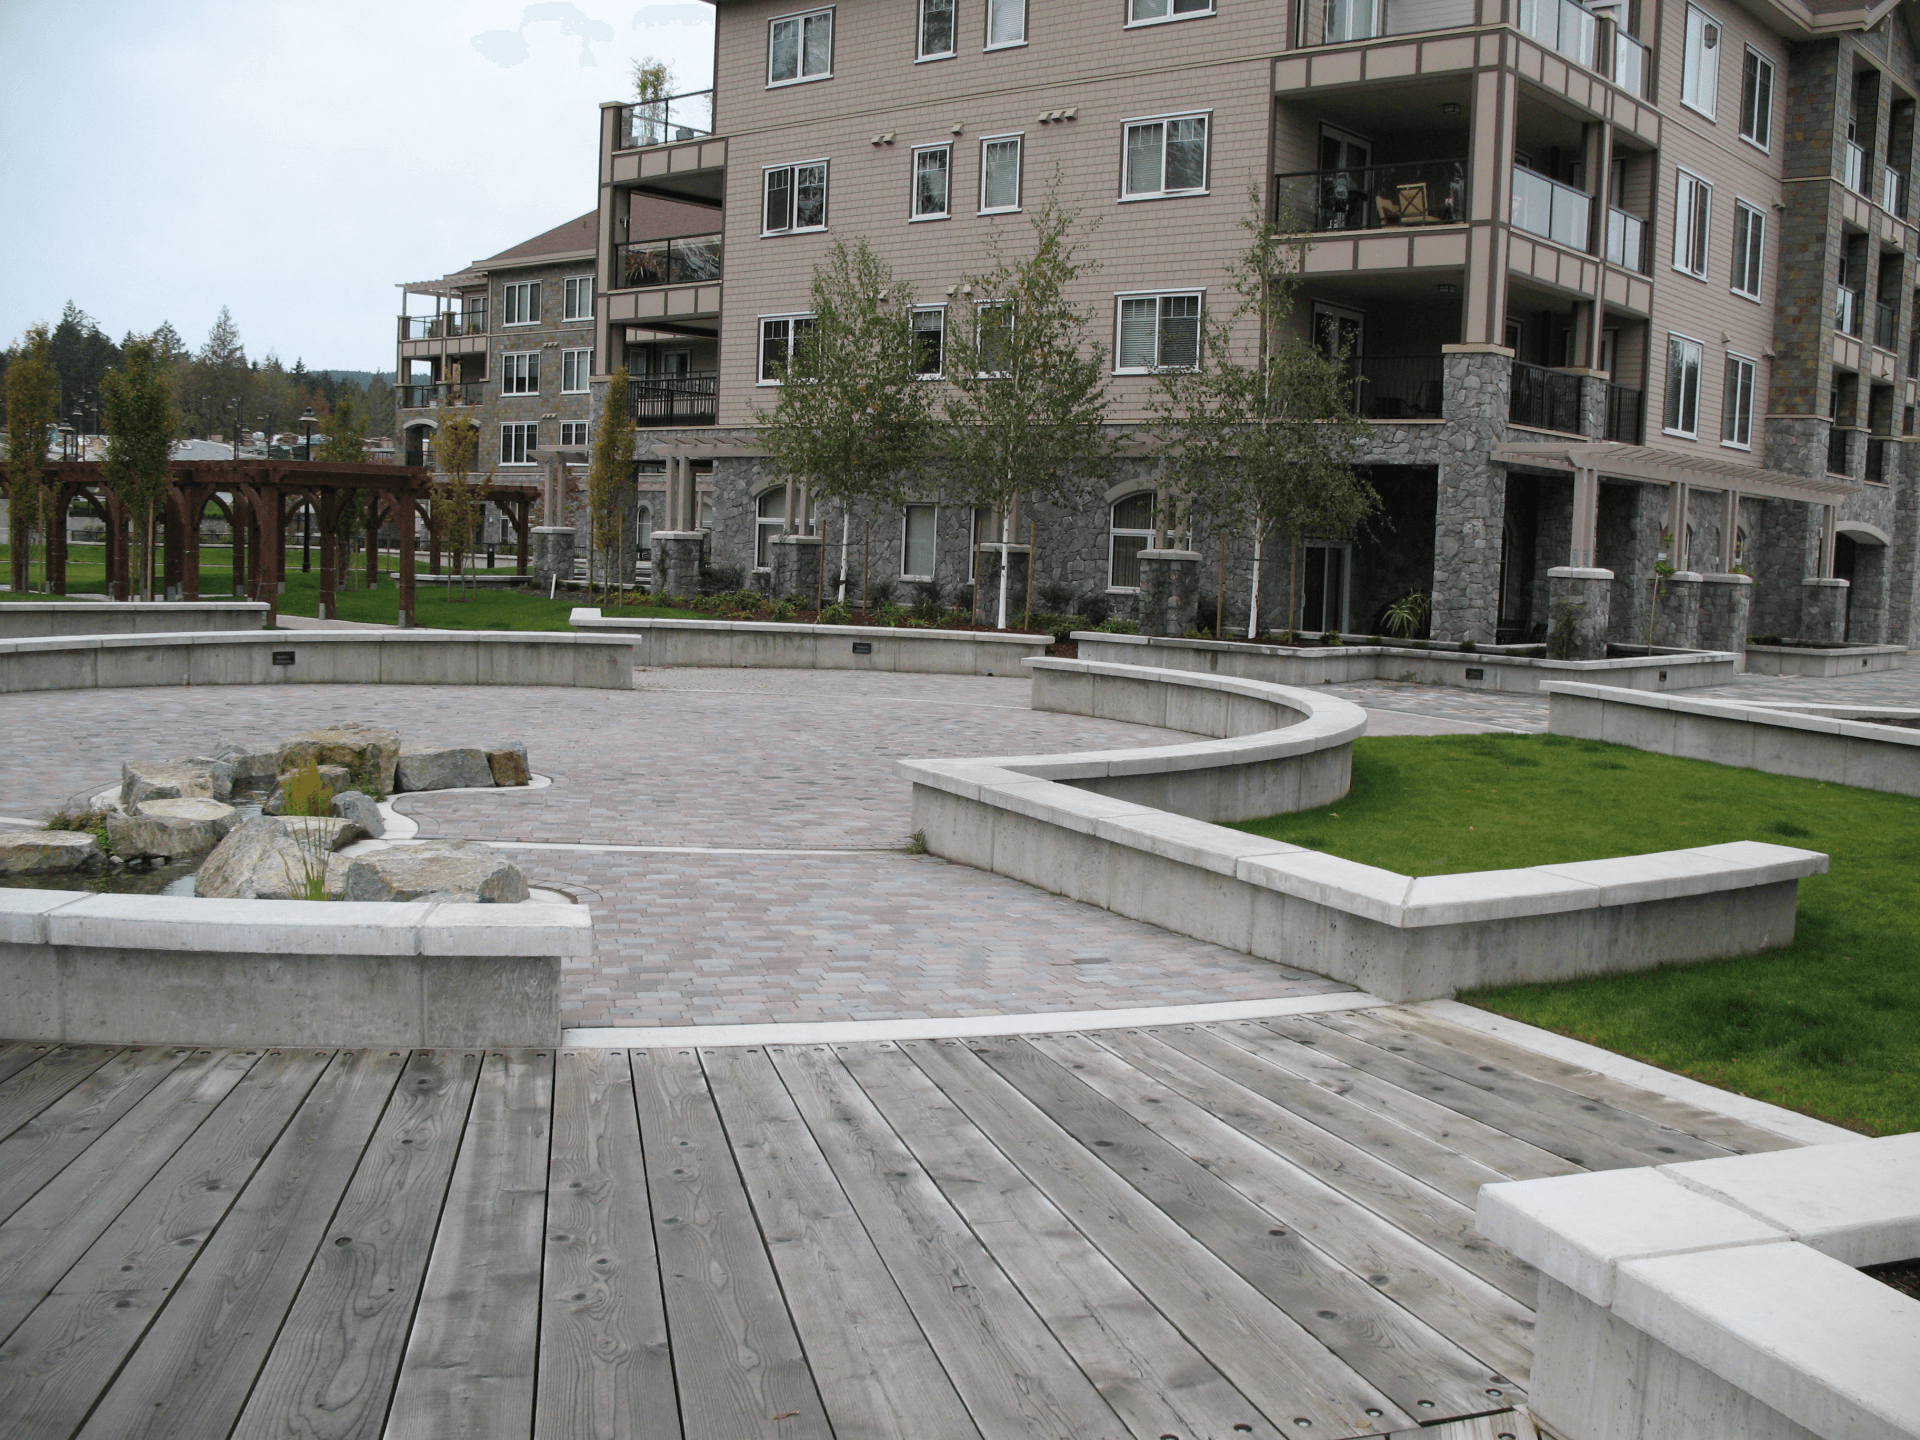 Commercial retaining wall installations and landscape walls for public seating in Victoria BC